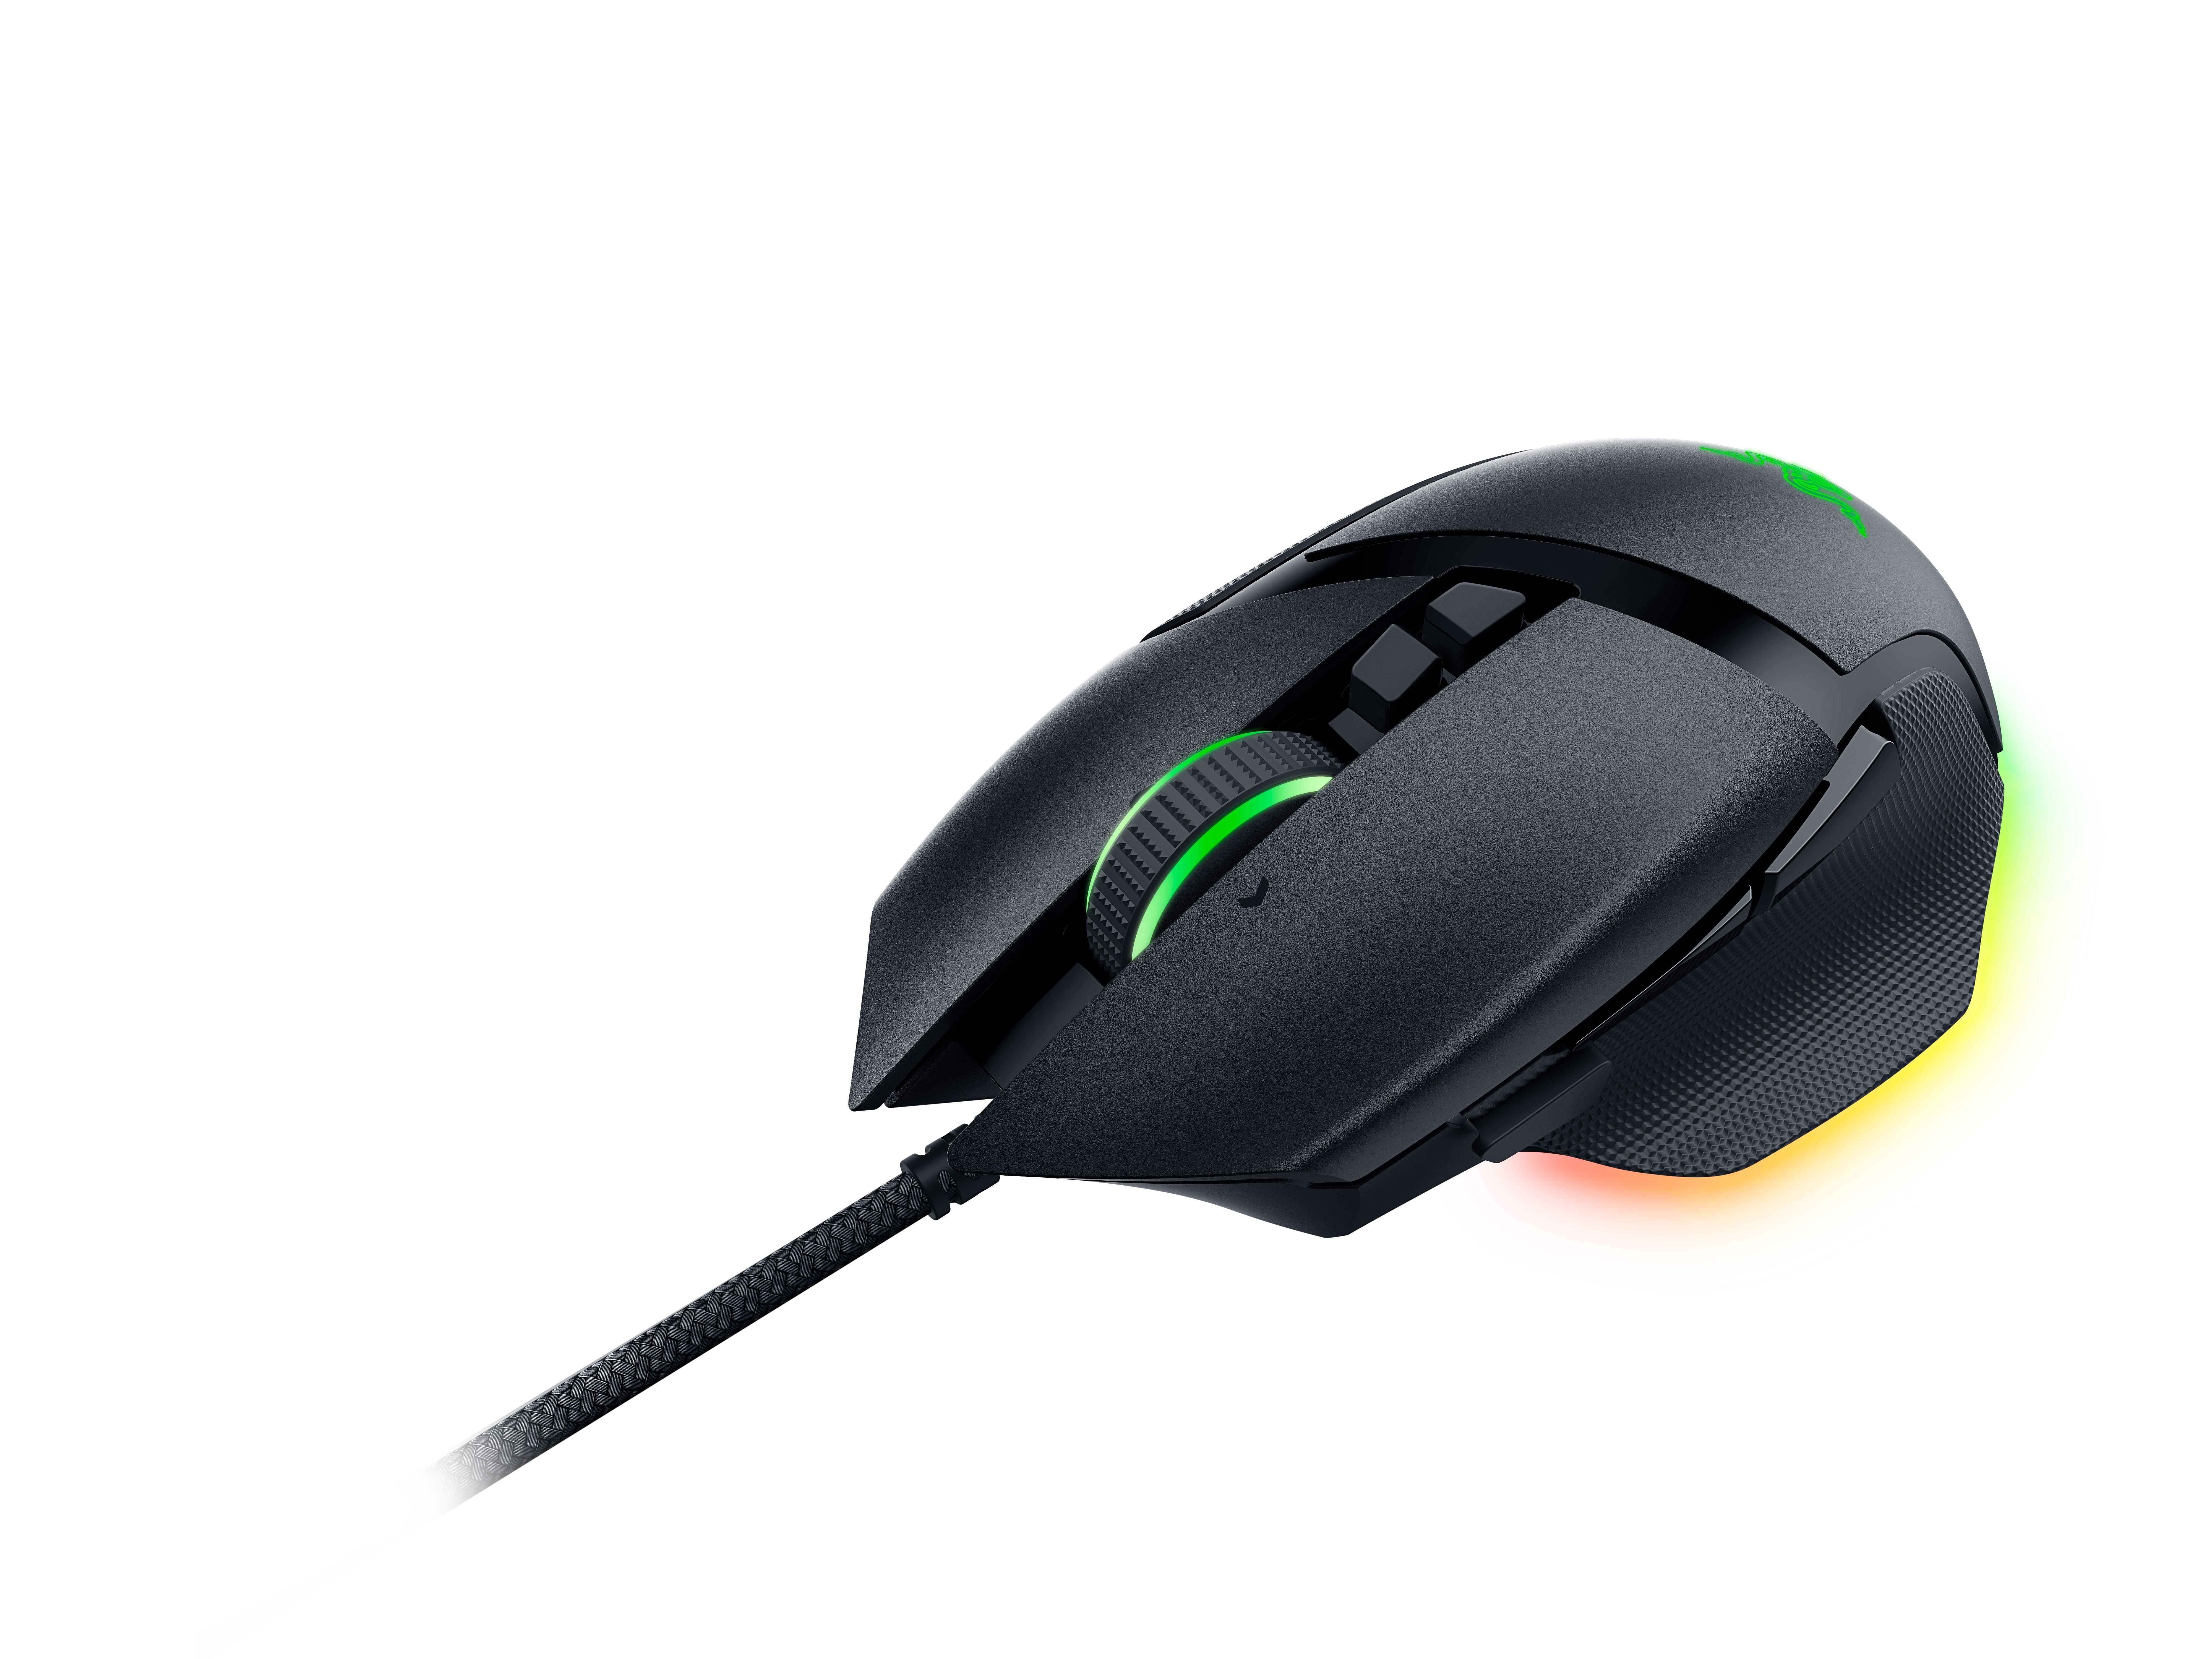 Razer Basilisk V3 review: A full-function gaming mouse with class